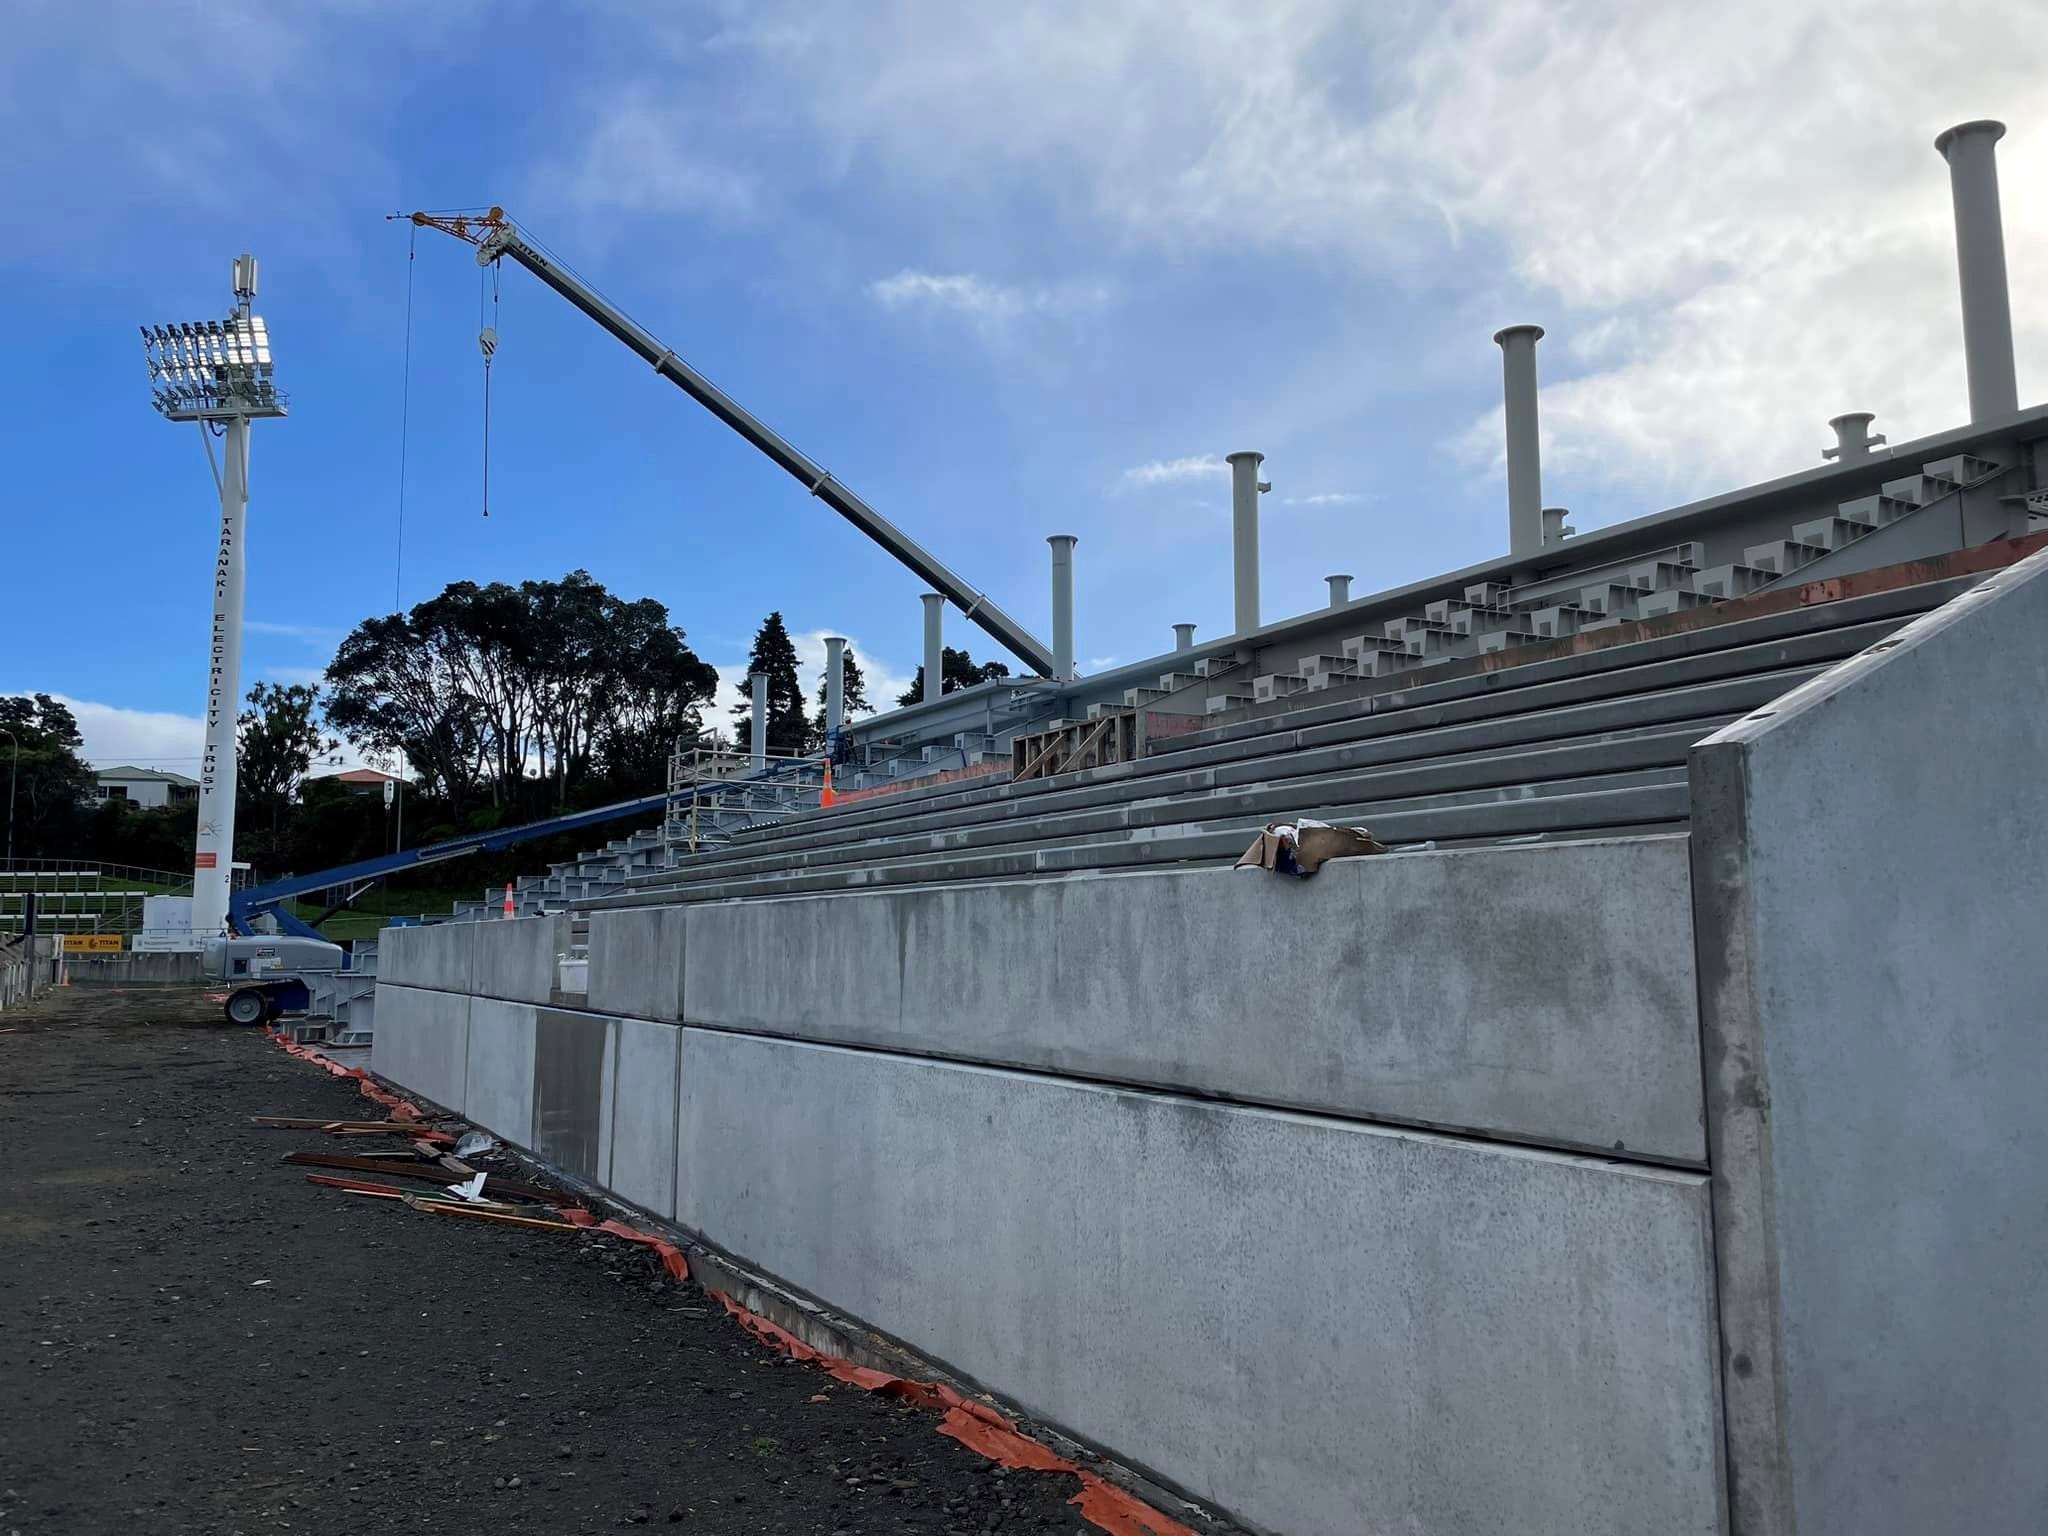 Venues: Yarrow Stadium rebuild on track and within budget